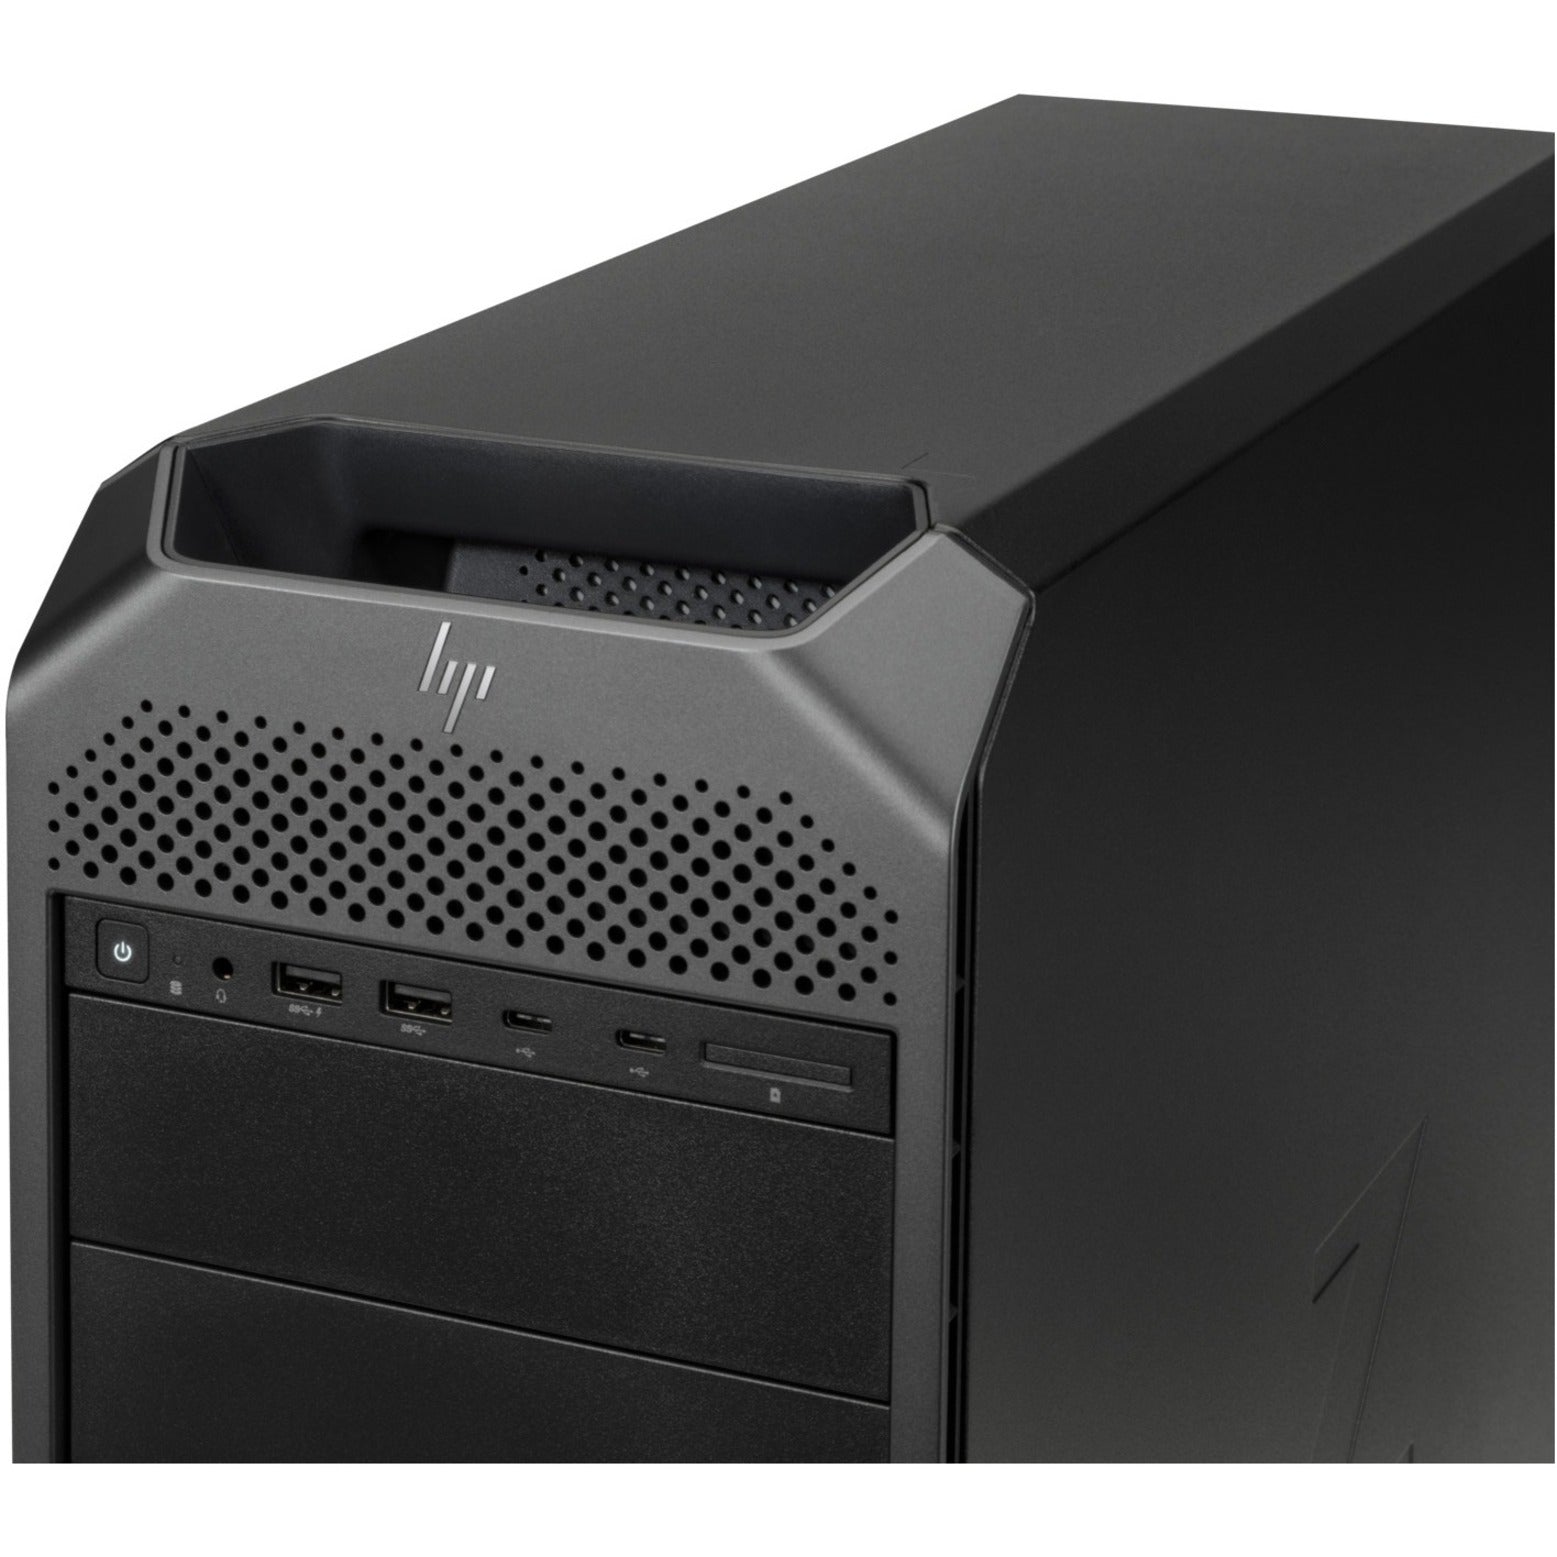 HP Z6 G4 Workstation - Intel Xeon Silver Deca-core 2.40 GHz - 16 GB RAM - 512 GB SSD - Tower [Discontinued]